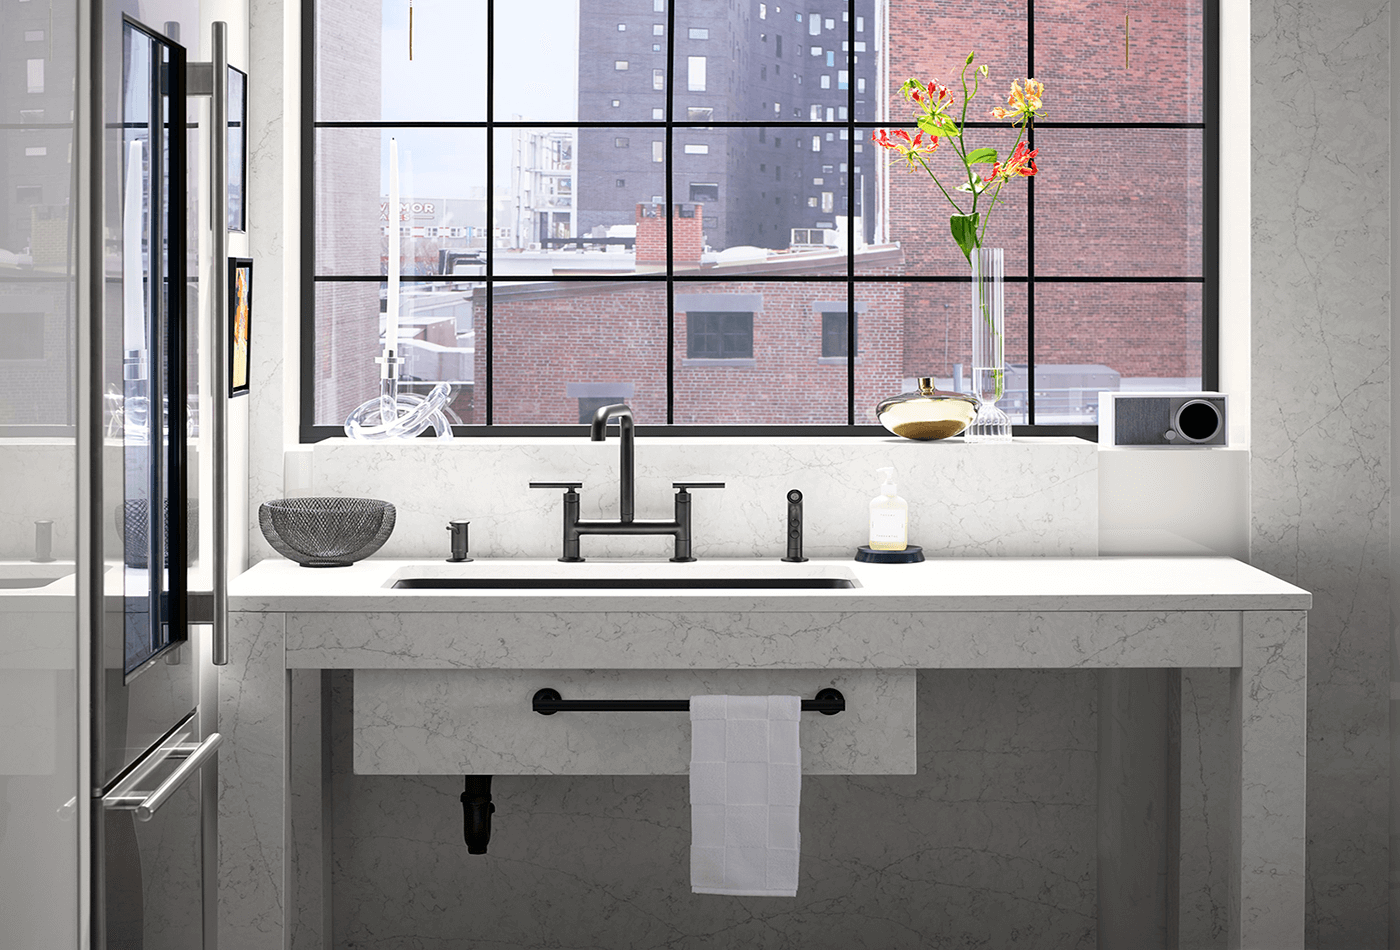 Silestone's Applications extend far beyond the kitchen counter